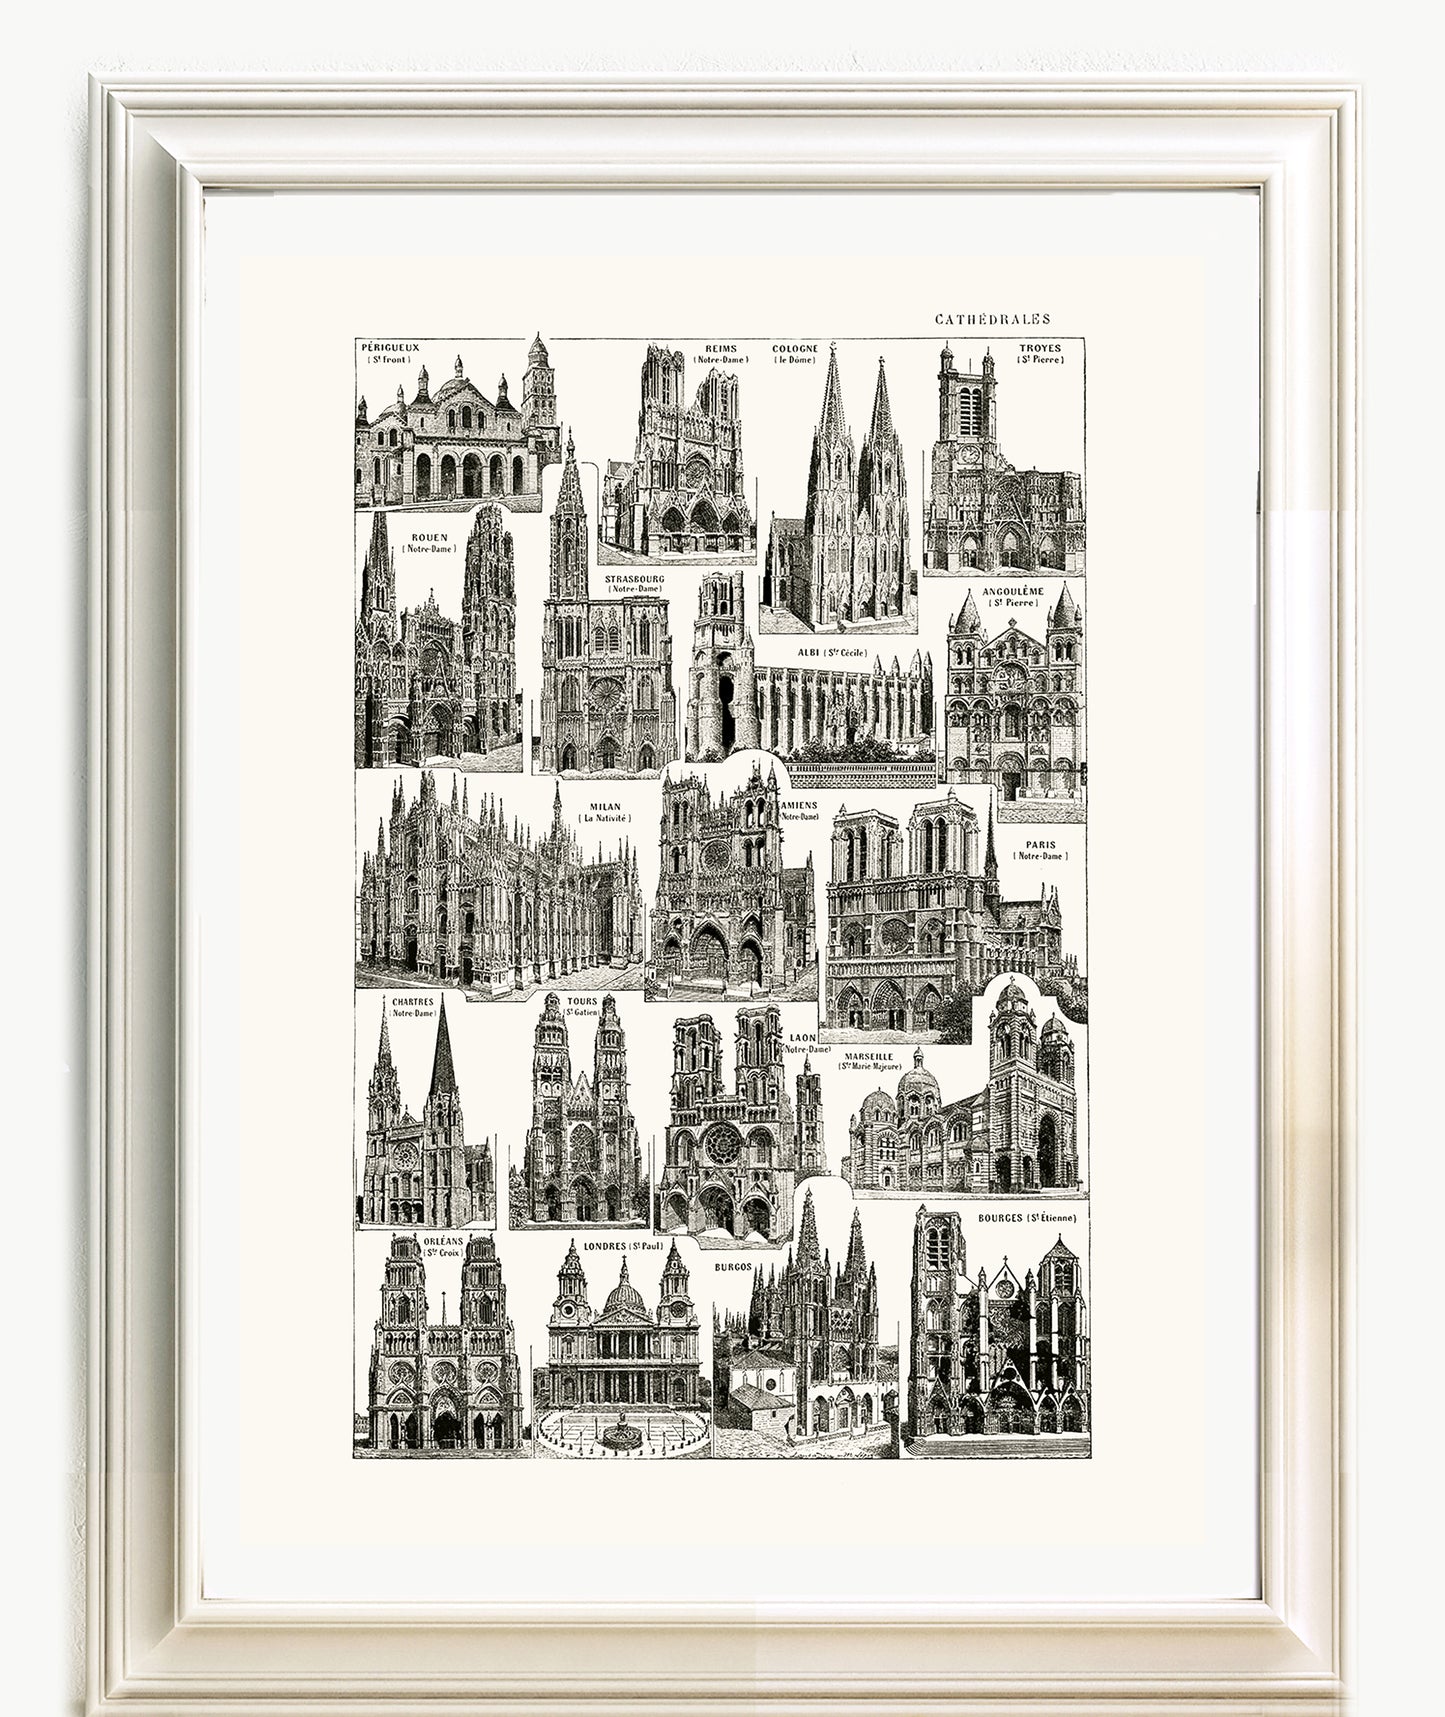 Large Cathedrals Poster - White Background